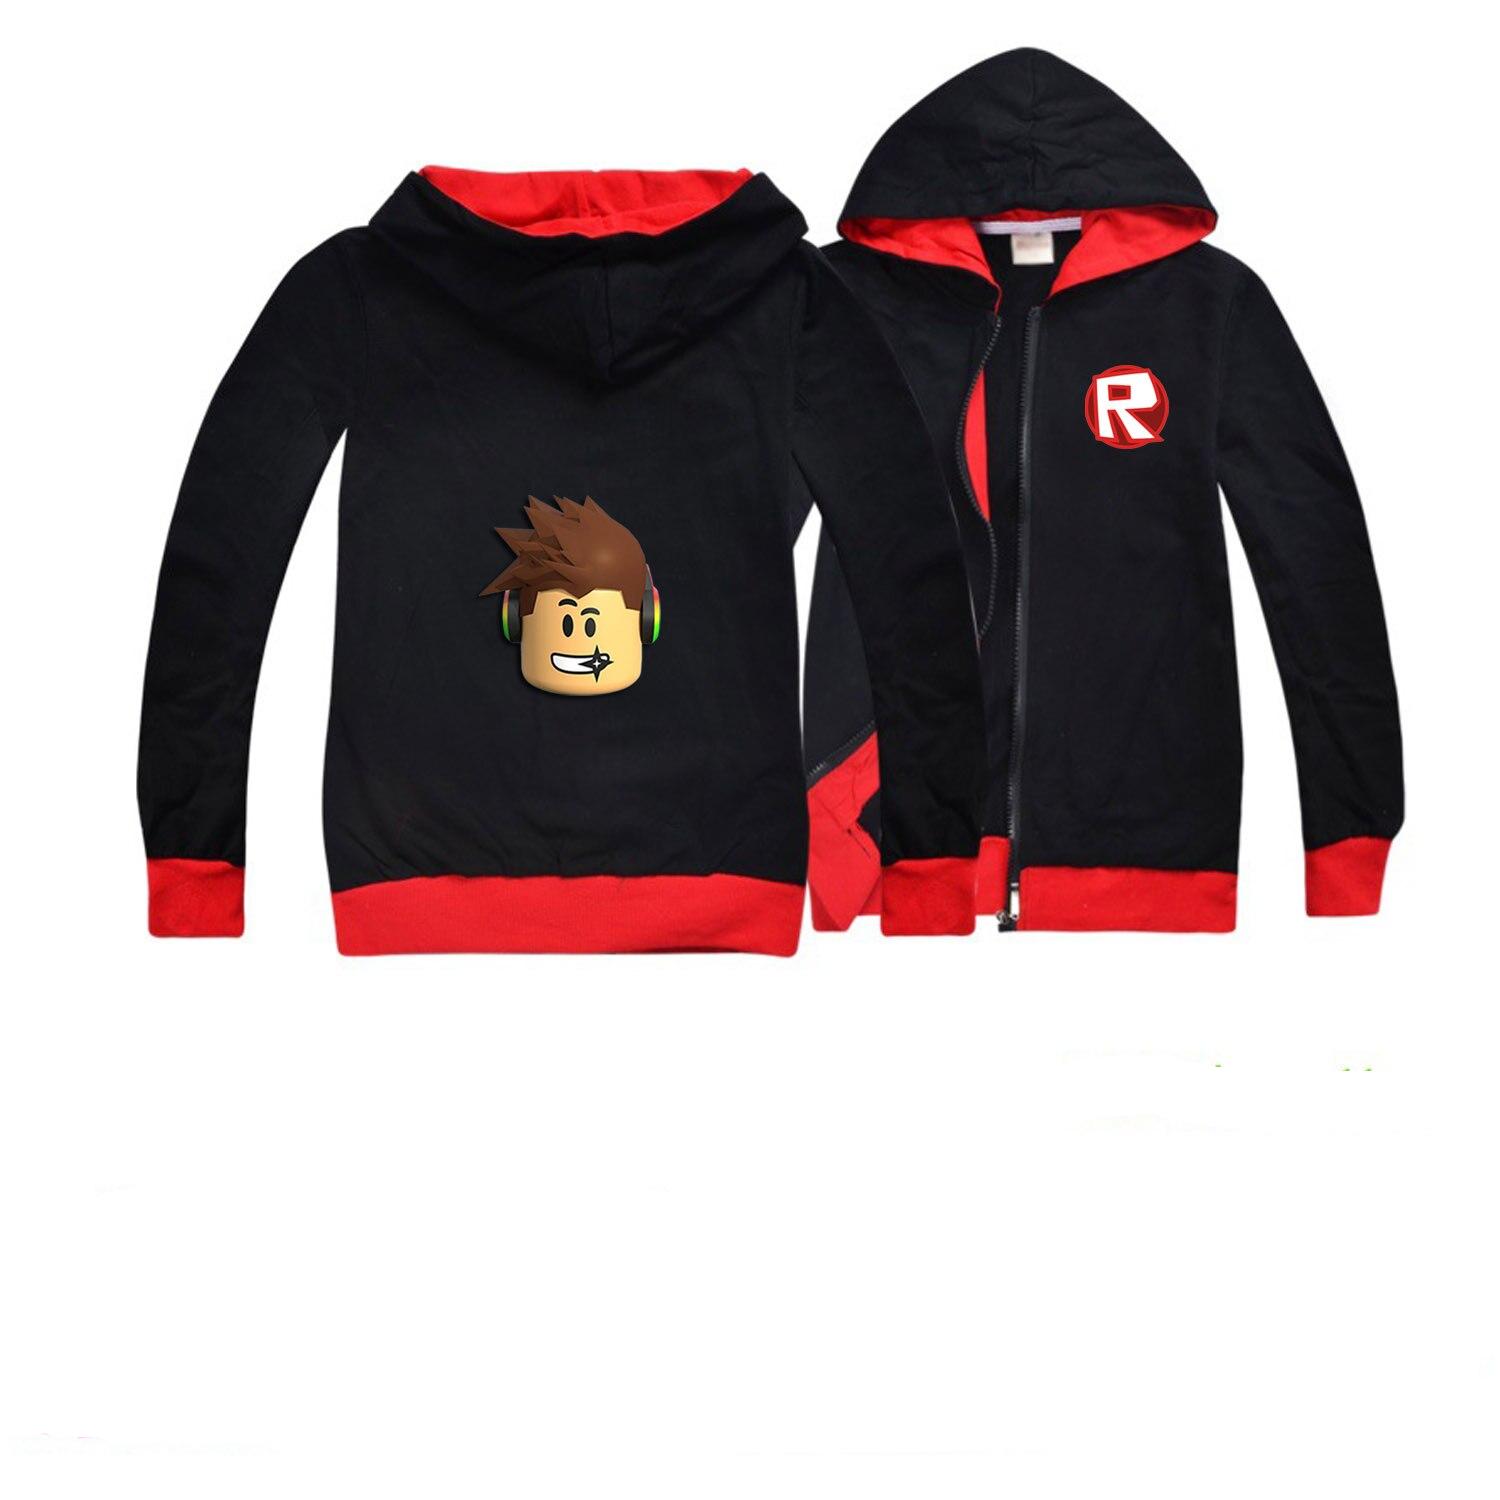 Roblox Zip-up Hoodie Black and red color